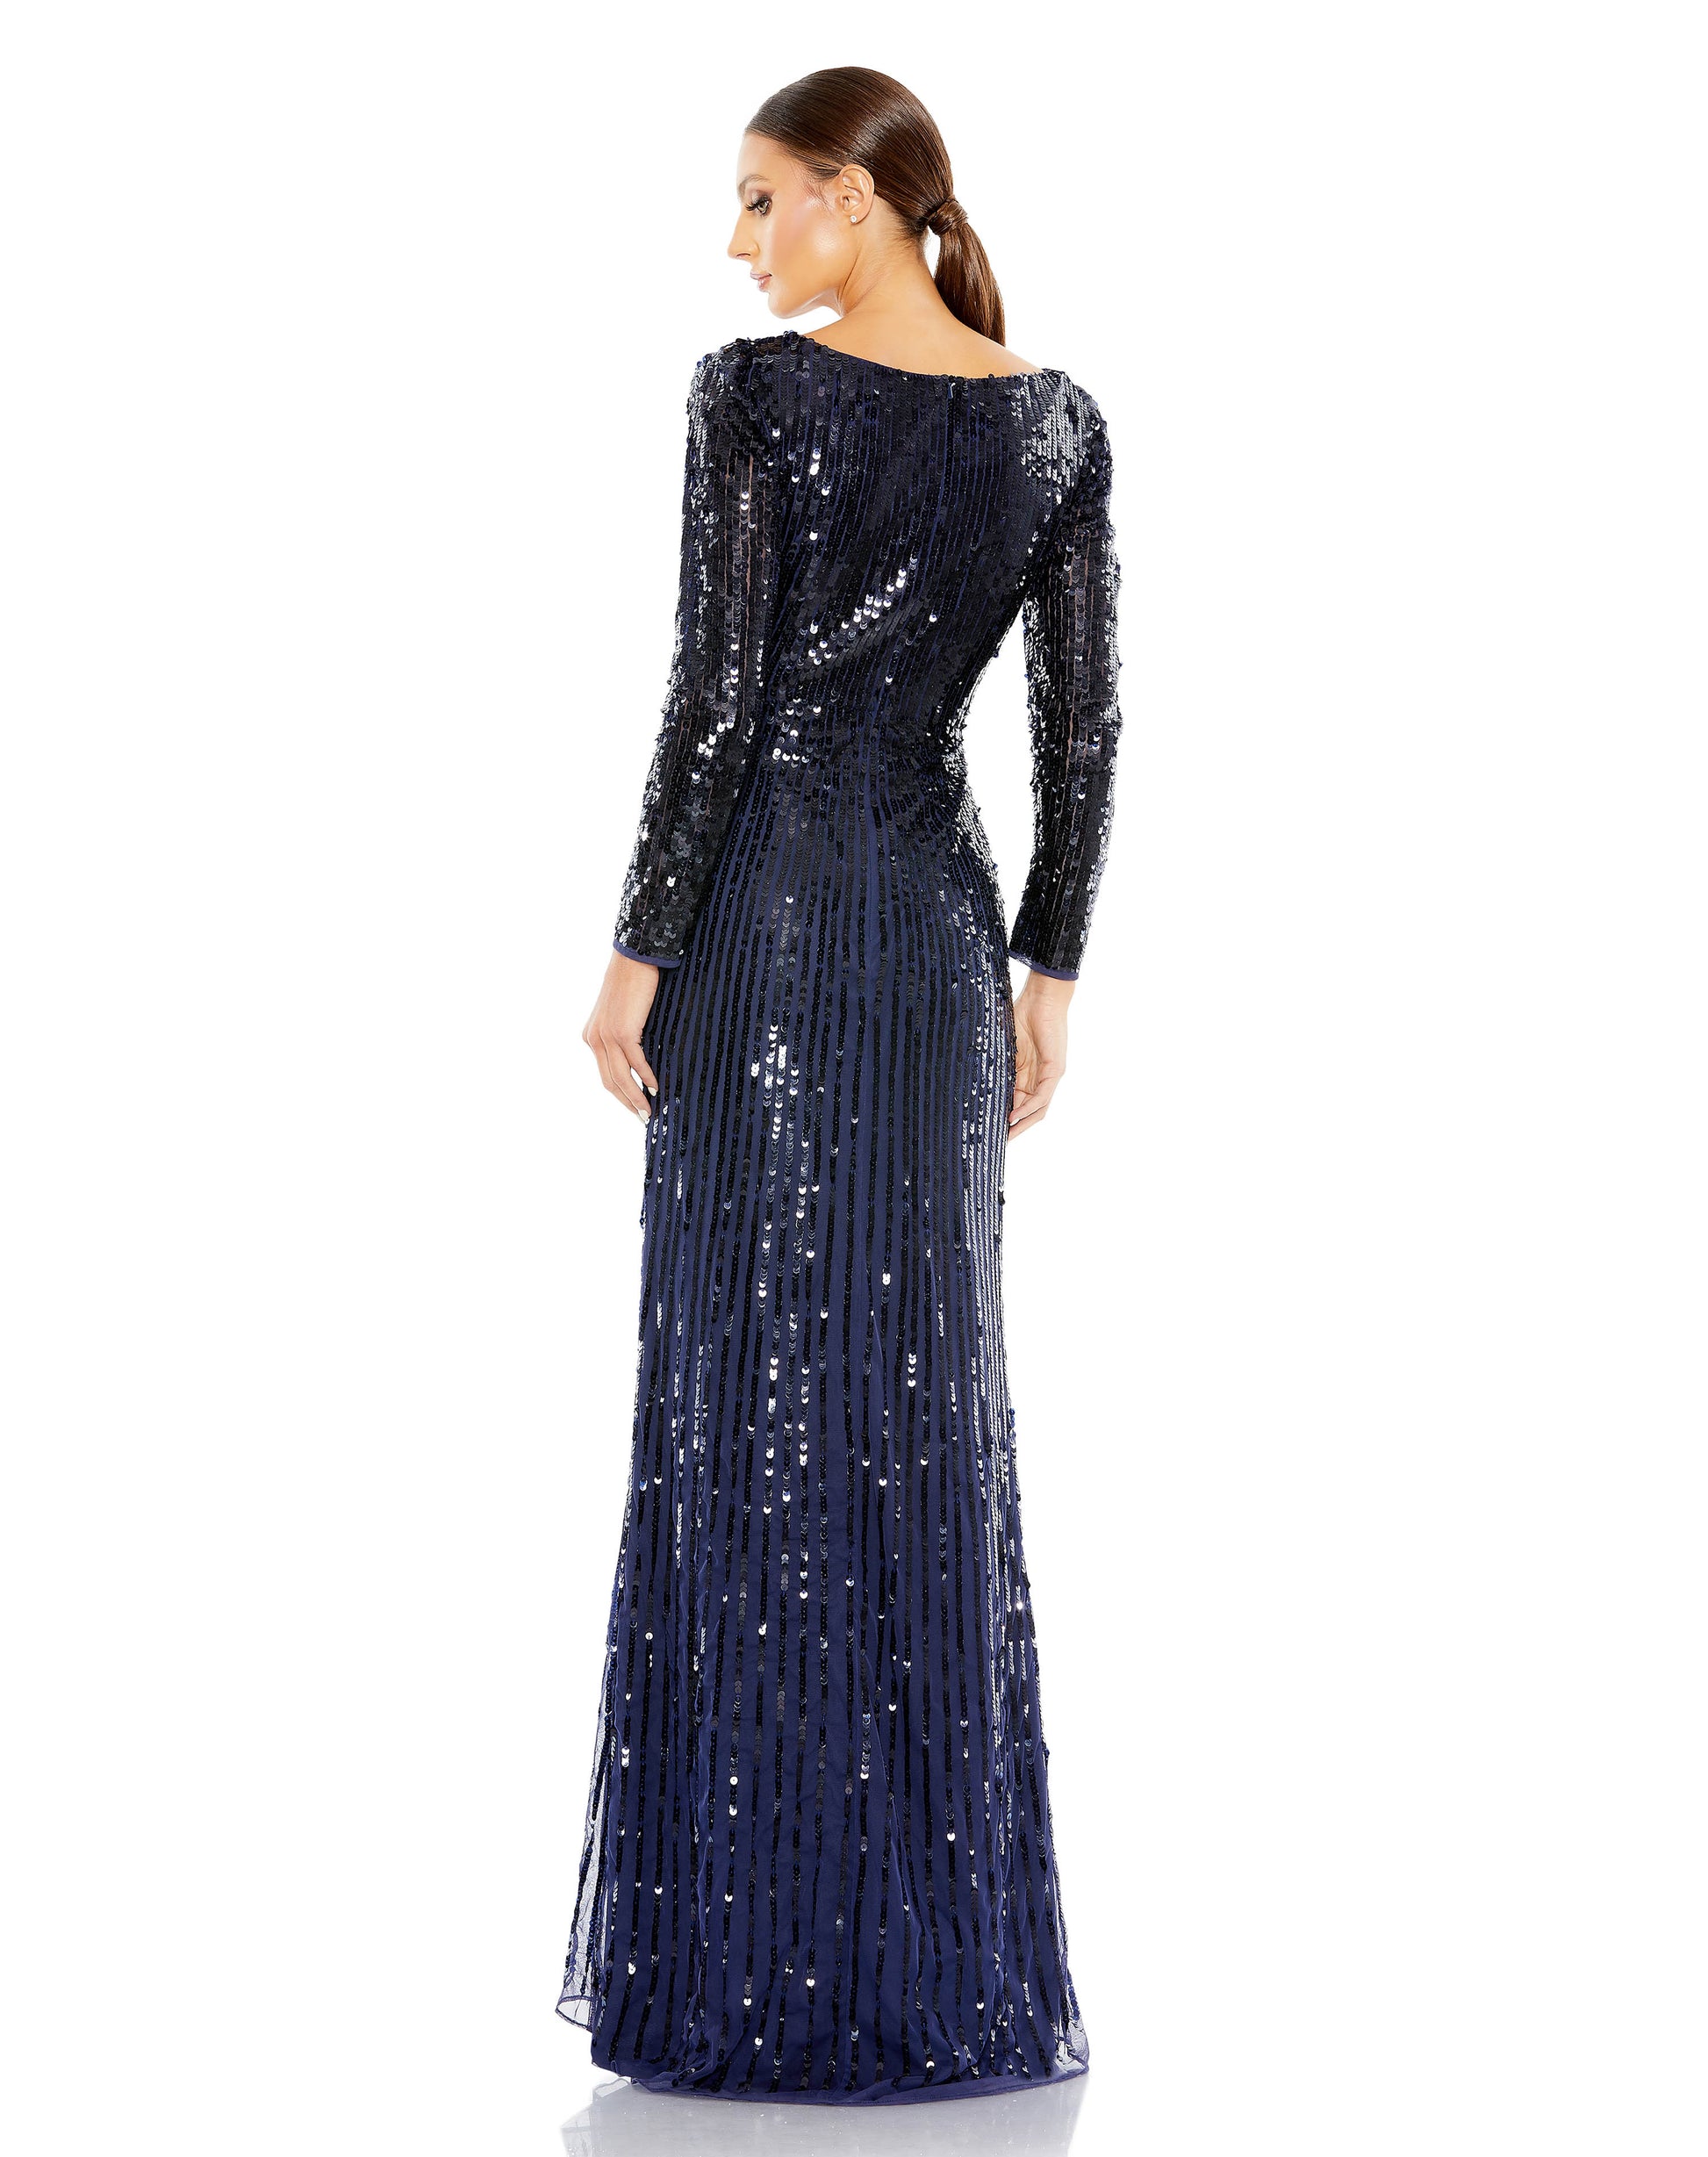 Mac Duggal Sequined mesh overlay; 100% polyester lining Fully lined through bodice and skirt; semi-sheer unlined sleeves V-neckline Long sleeves Faux wrap bodice Draped floor-length skirt Thigh-high front slit Concealed back zipper Approx. 62.5" from top